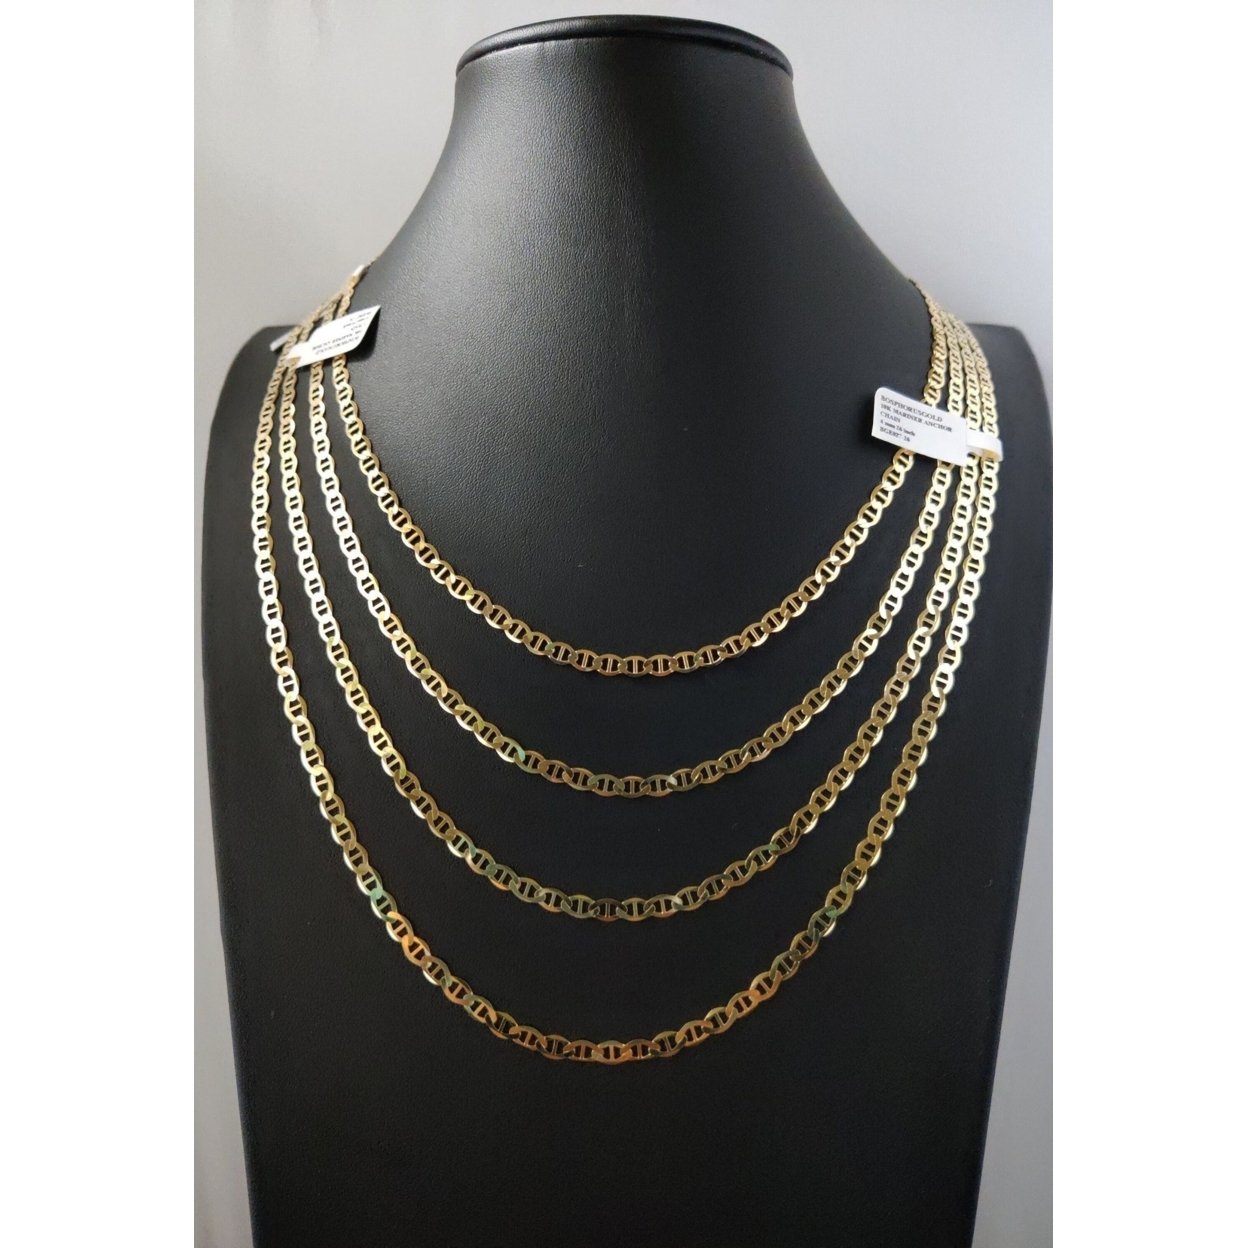 Yellow Gold Filled High Polish Finsh Chain Necklace,Mariner Chain Necklace,Necklace,Gold Necklace, Mariner Necklace, - 16''